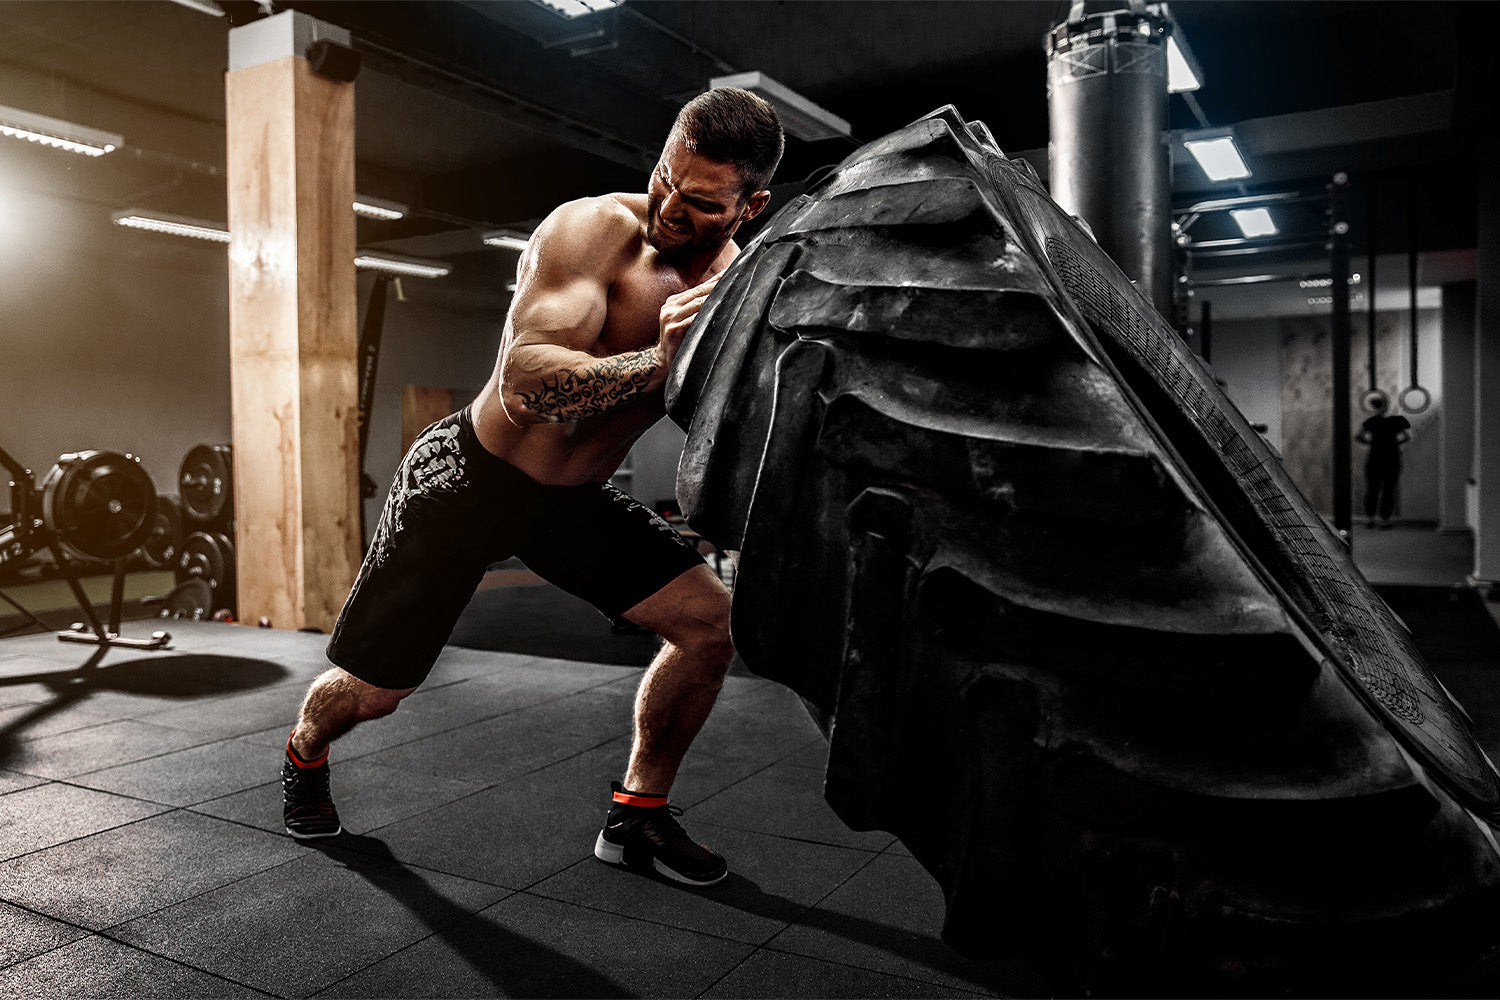 The Best Arm Workouts for a Crossfit Routine